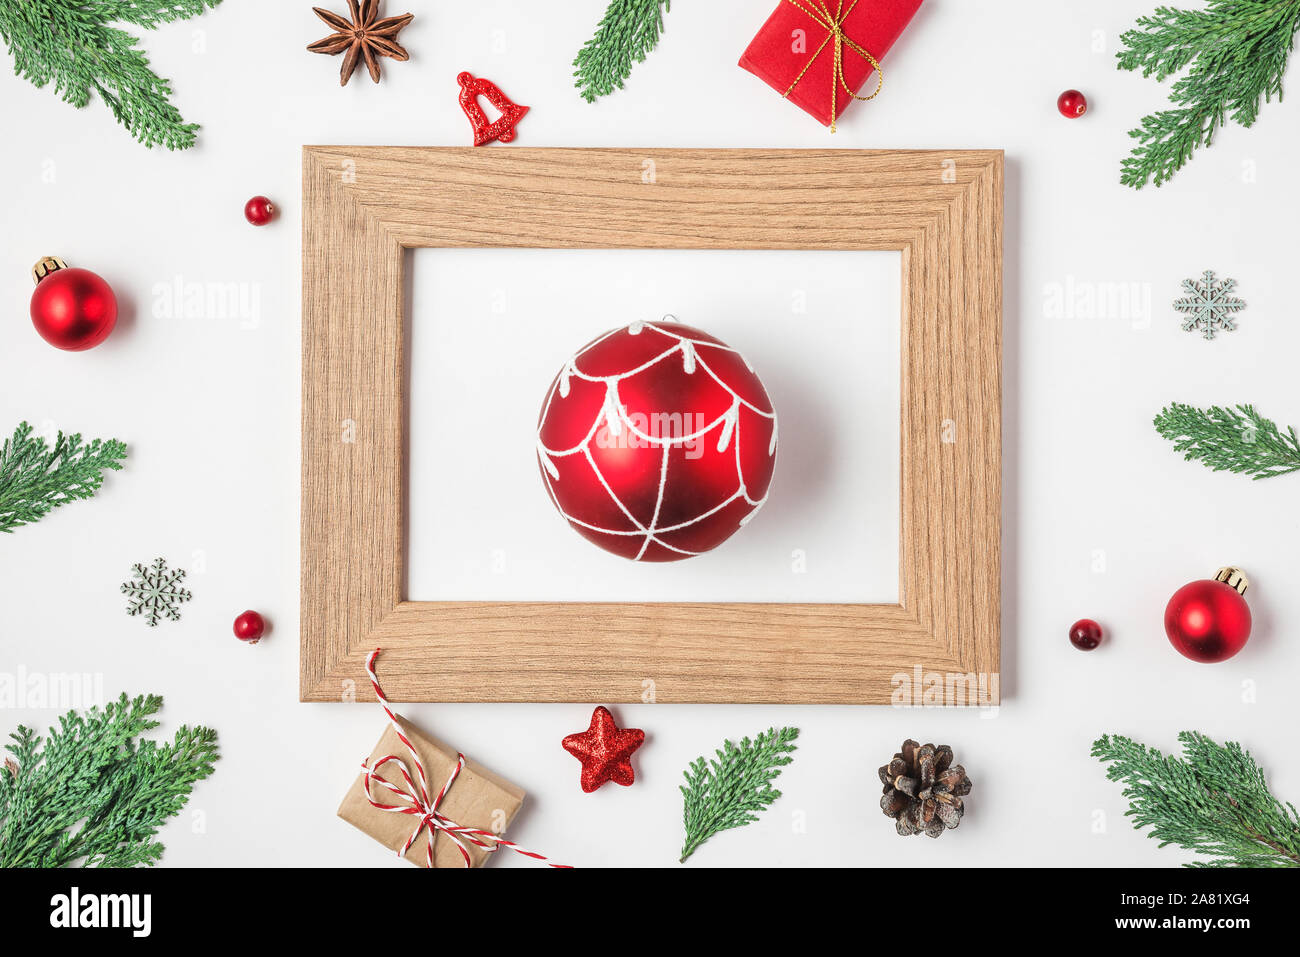 Christmas or Happy New Year composition. Red ball in picture frame with fir tree branches, red decorations and gift boxes on white background. top vie Stock Photo